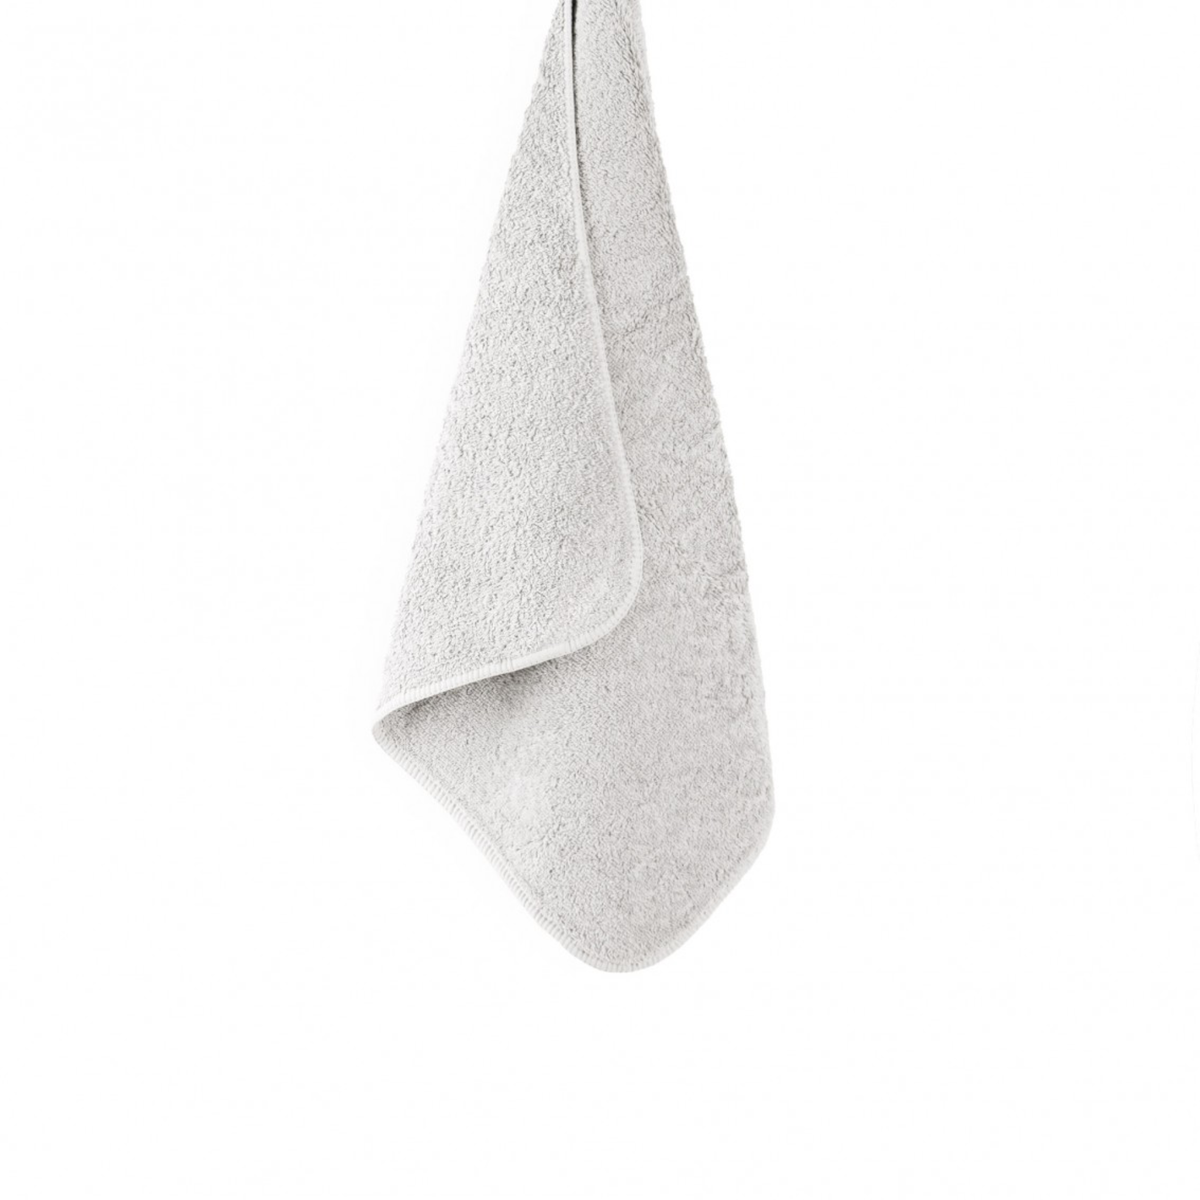 Graccioza Long Double Loop Bath Towels in Cloud Color Hanging Against a White Background